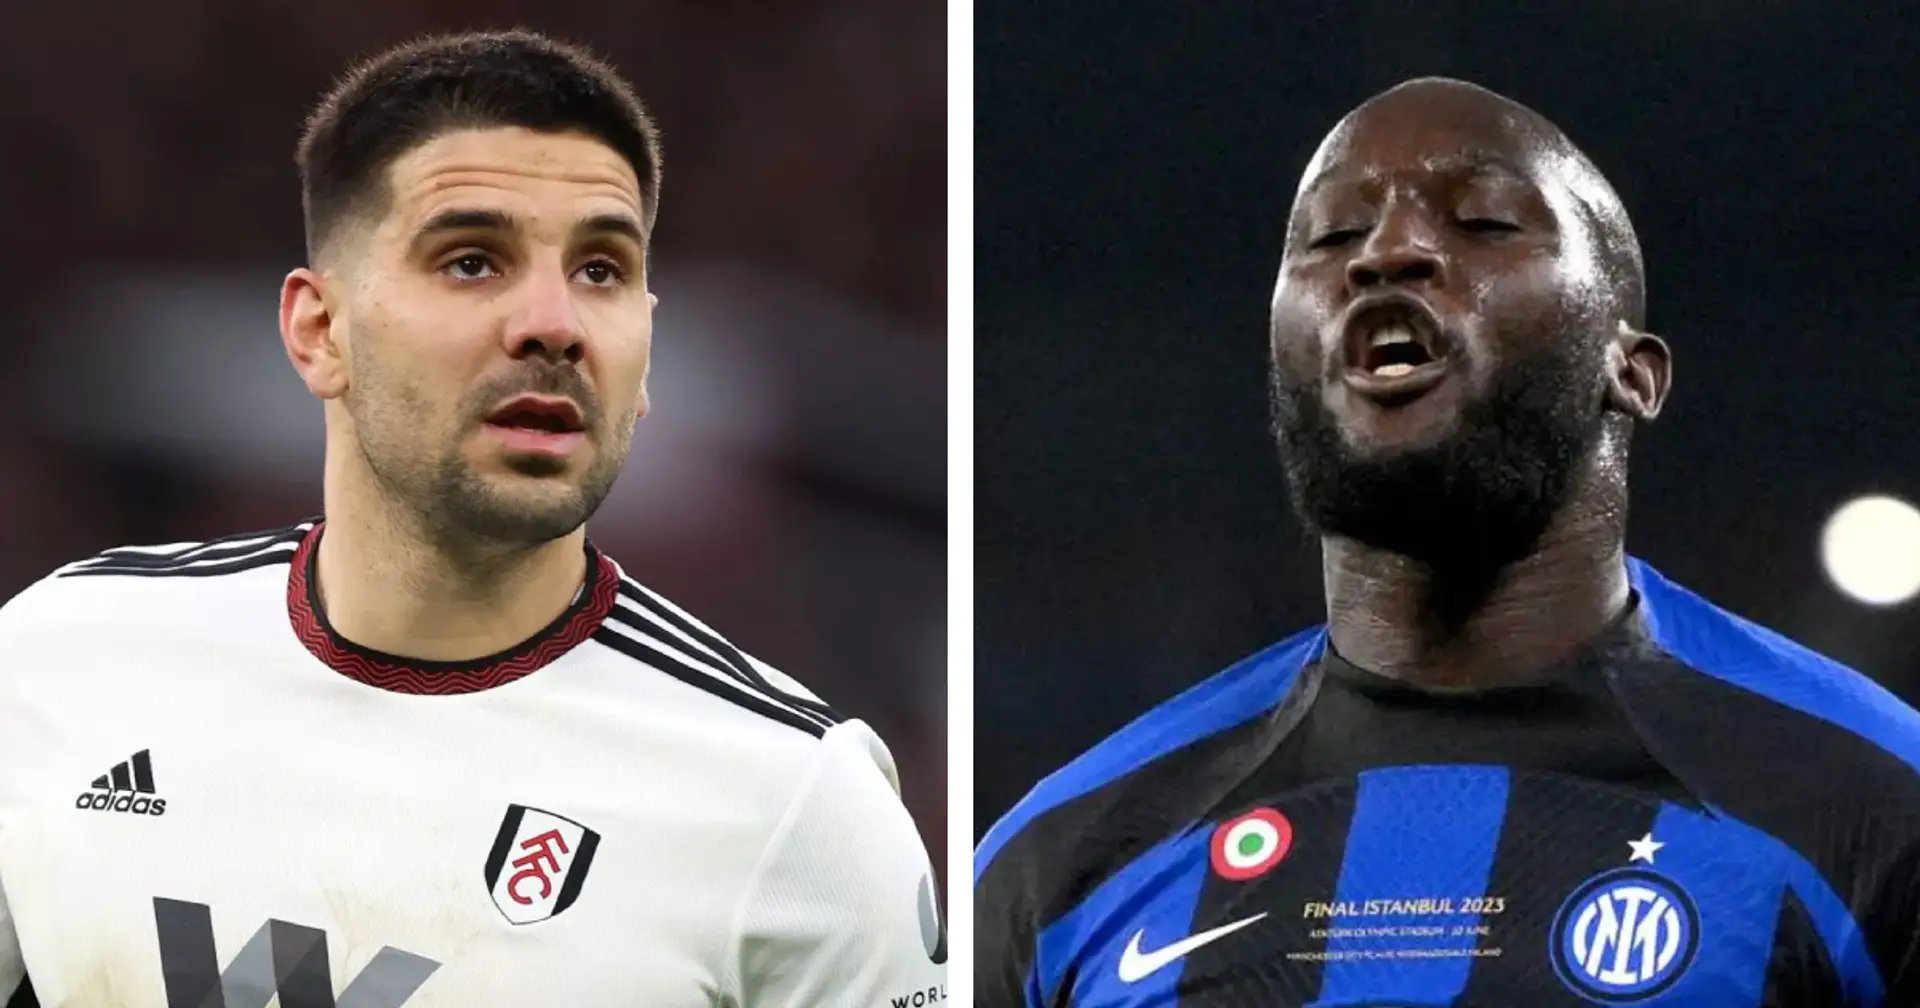 Another exit route blocked for Lukaku - it has to do with Mitrovic